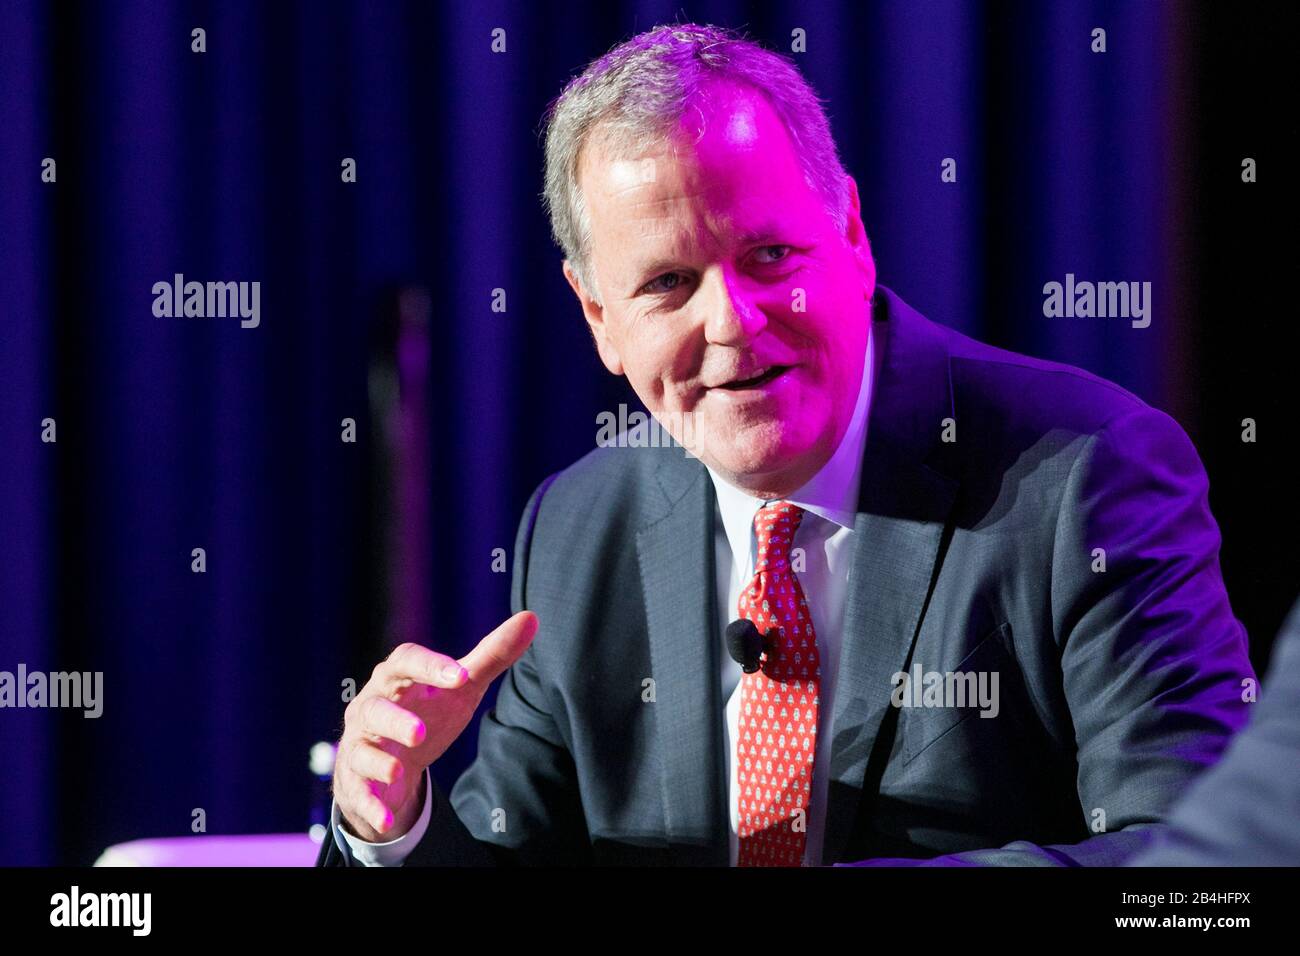 Doug Parker, Chairman and Chief Executive Officer, American Airlines Group and American Airlines, speaks at the U.S. Chamber of Commerce Aviation Summ Stock Photo